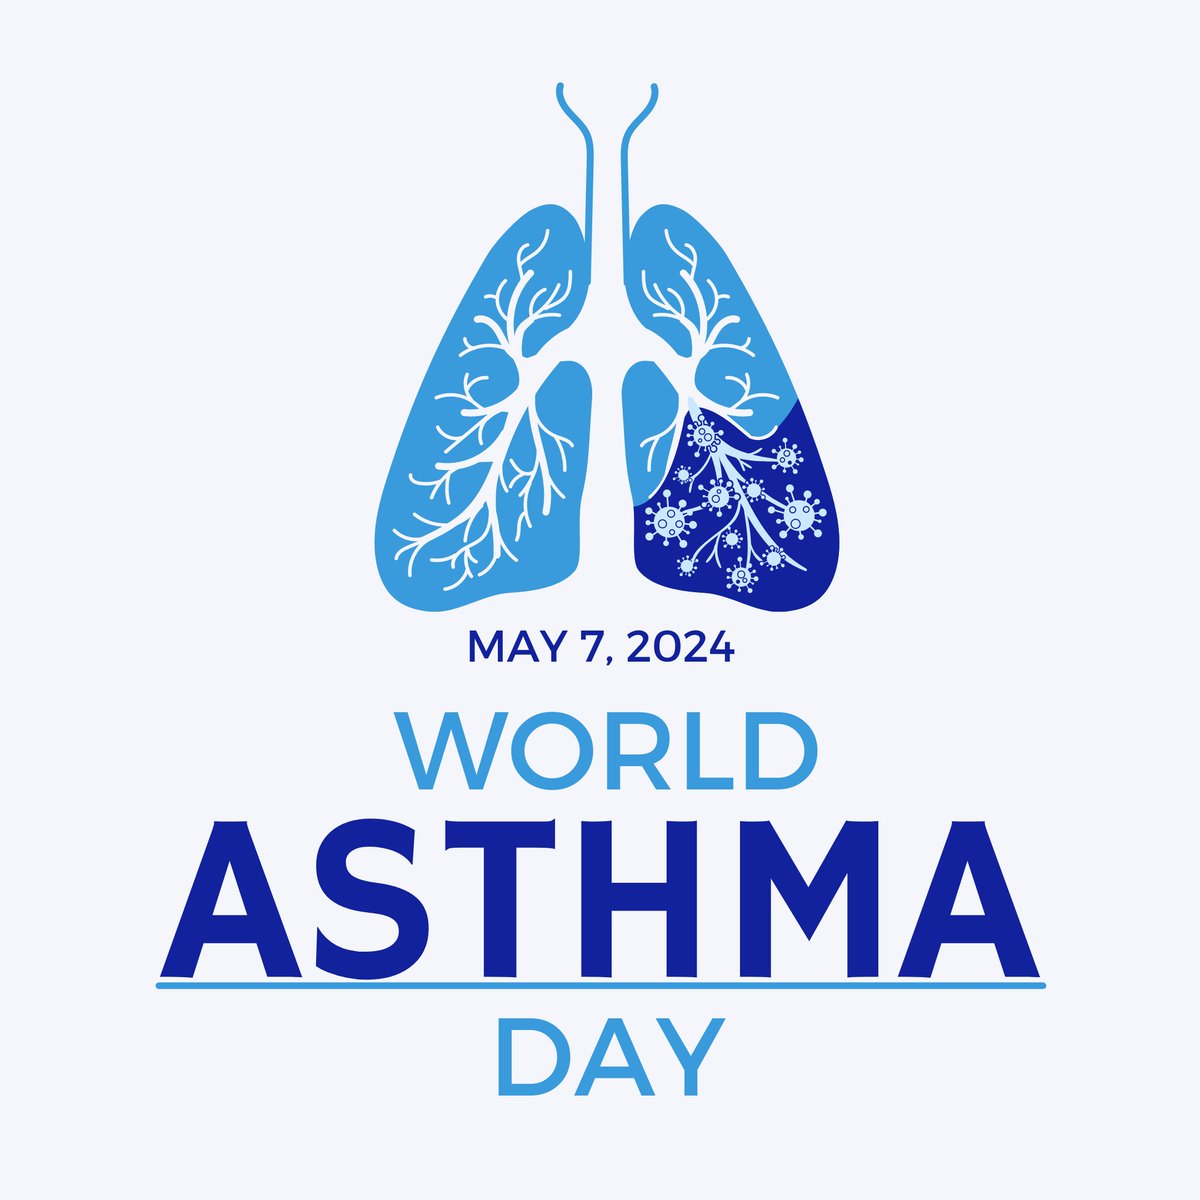 Today is World Asthma Day! 🫁
According to the CDC, Asthma is a disease that affects your lungs. It causes repeated episodes of wheezing, breathlessness, chest tightness, and nighttime or early morning coughing. To learn more about Asthma, visit cdc.gov/asthma.